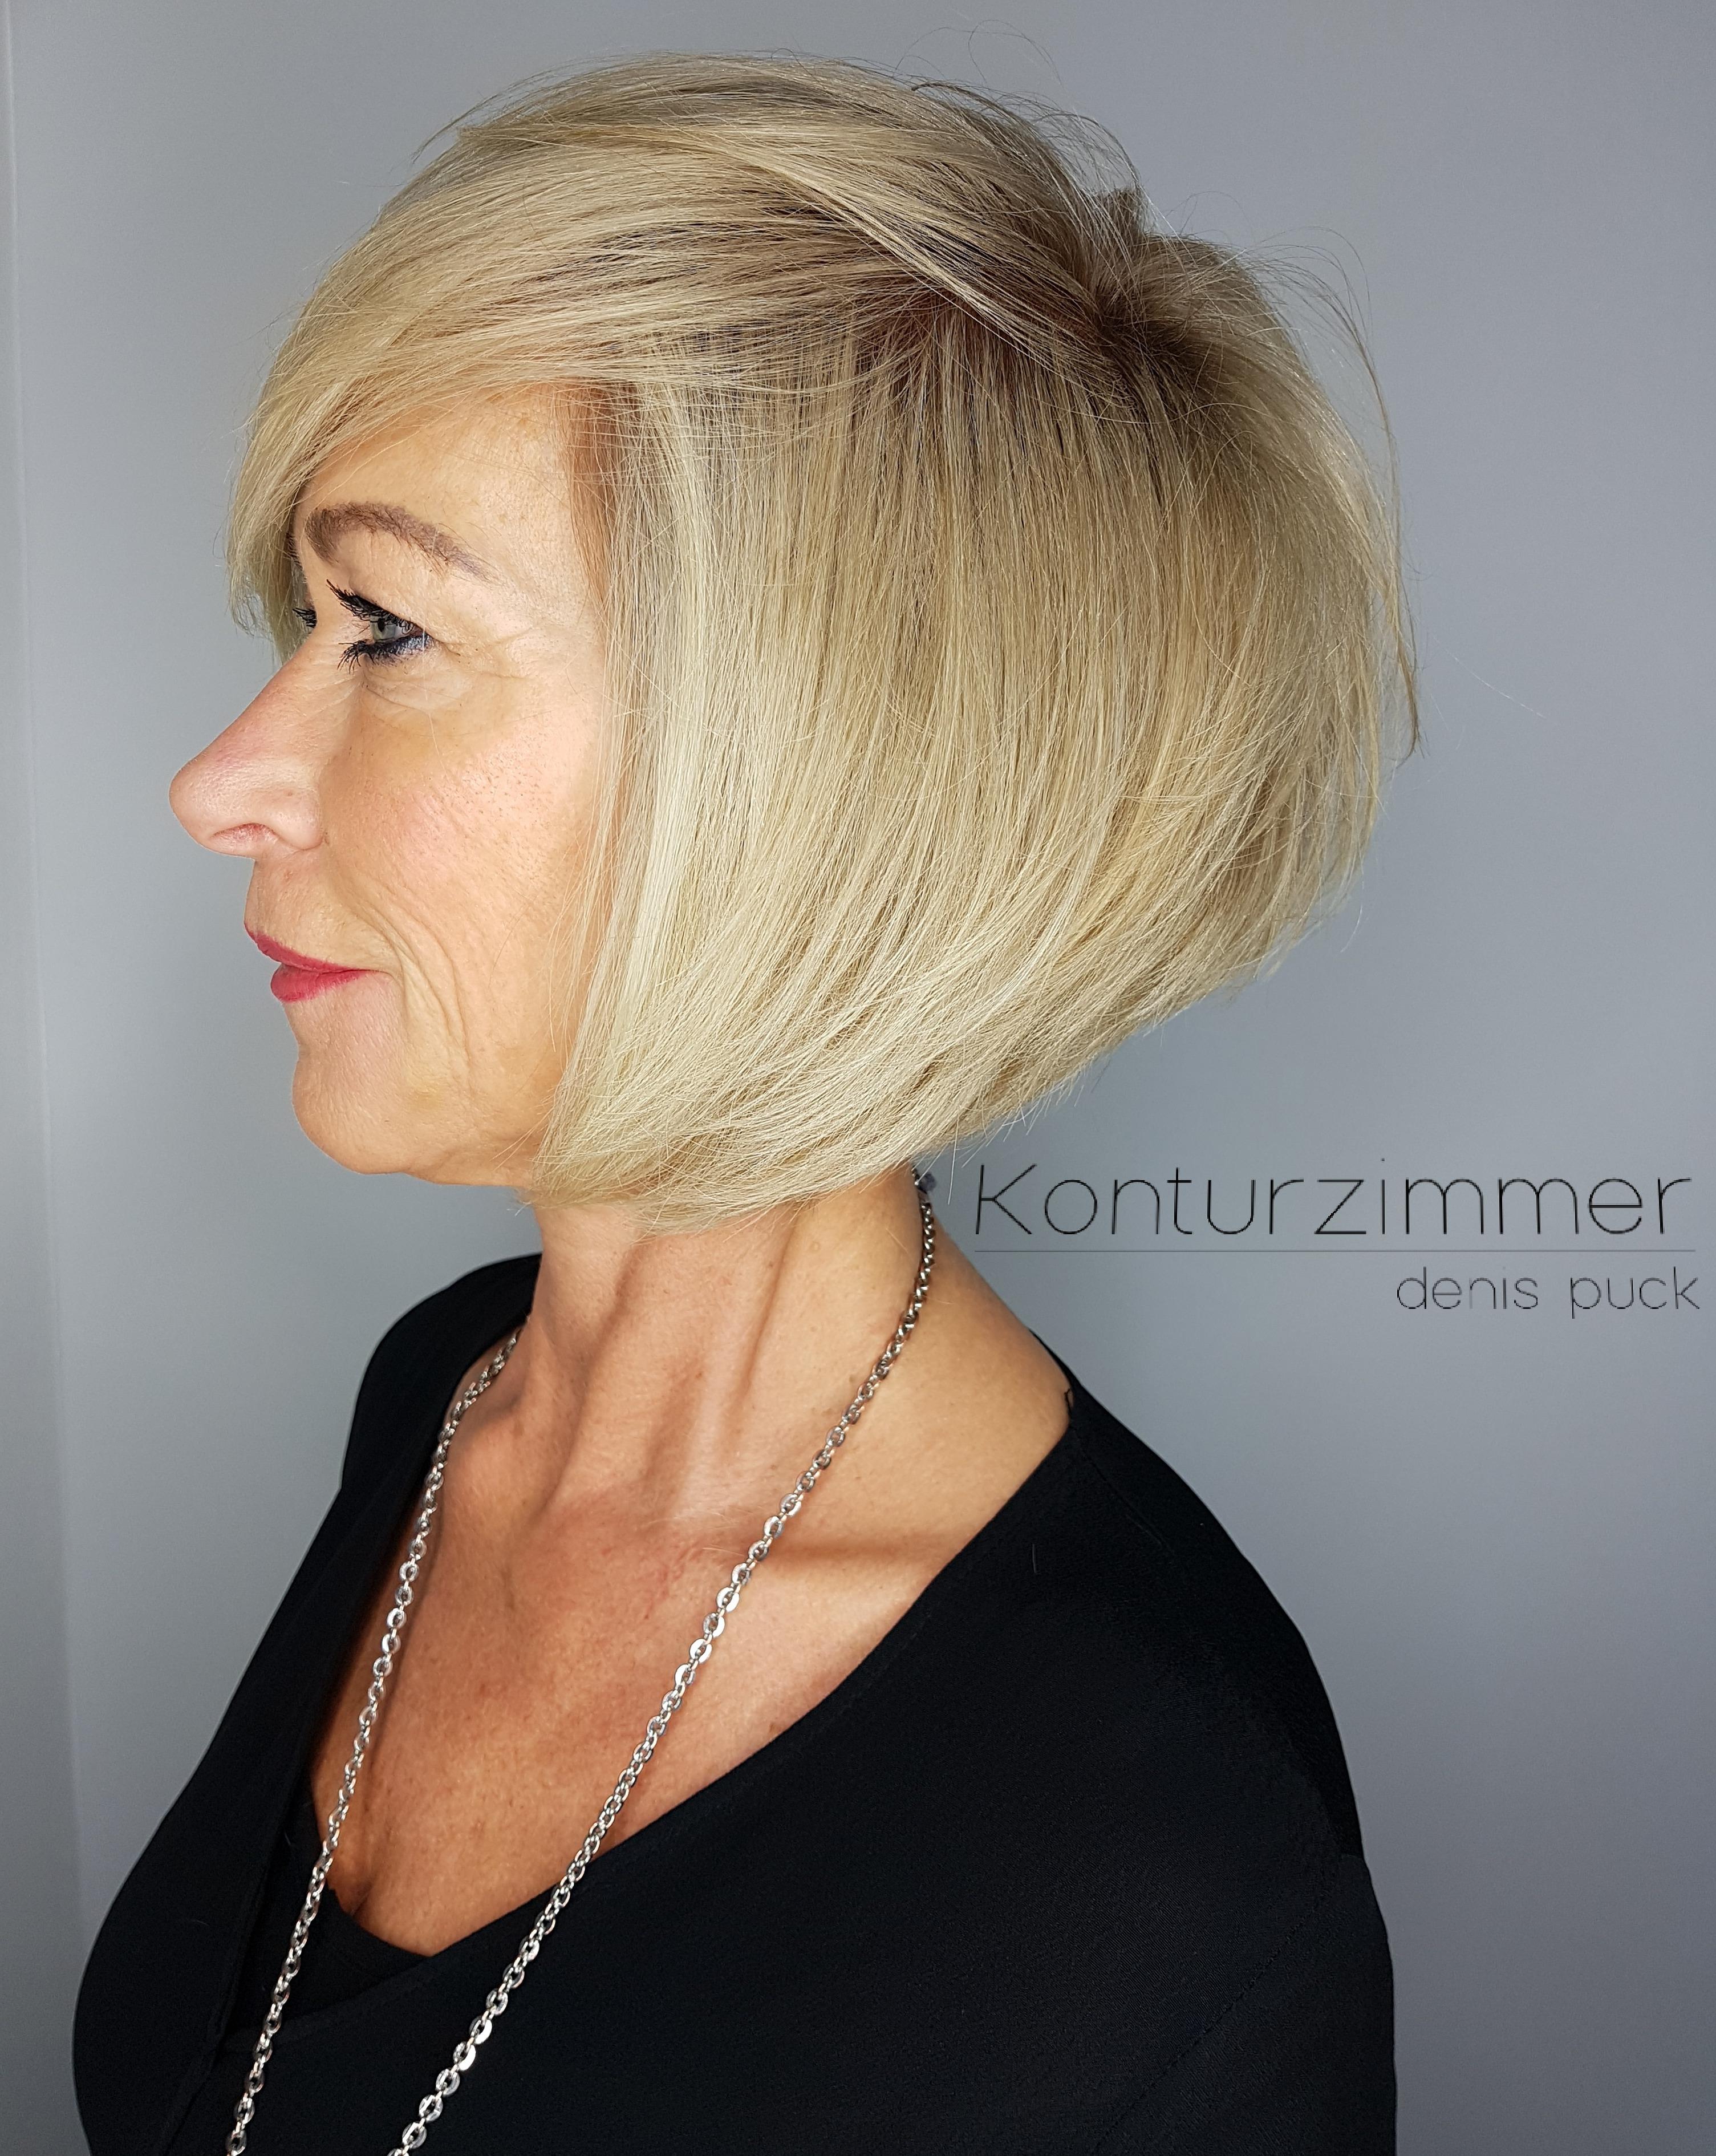 Natural Haircolor-Look Made by Konturzimmer denis puck in Potsdam